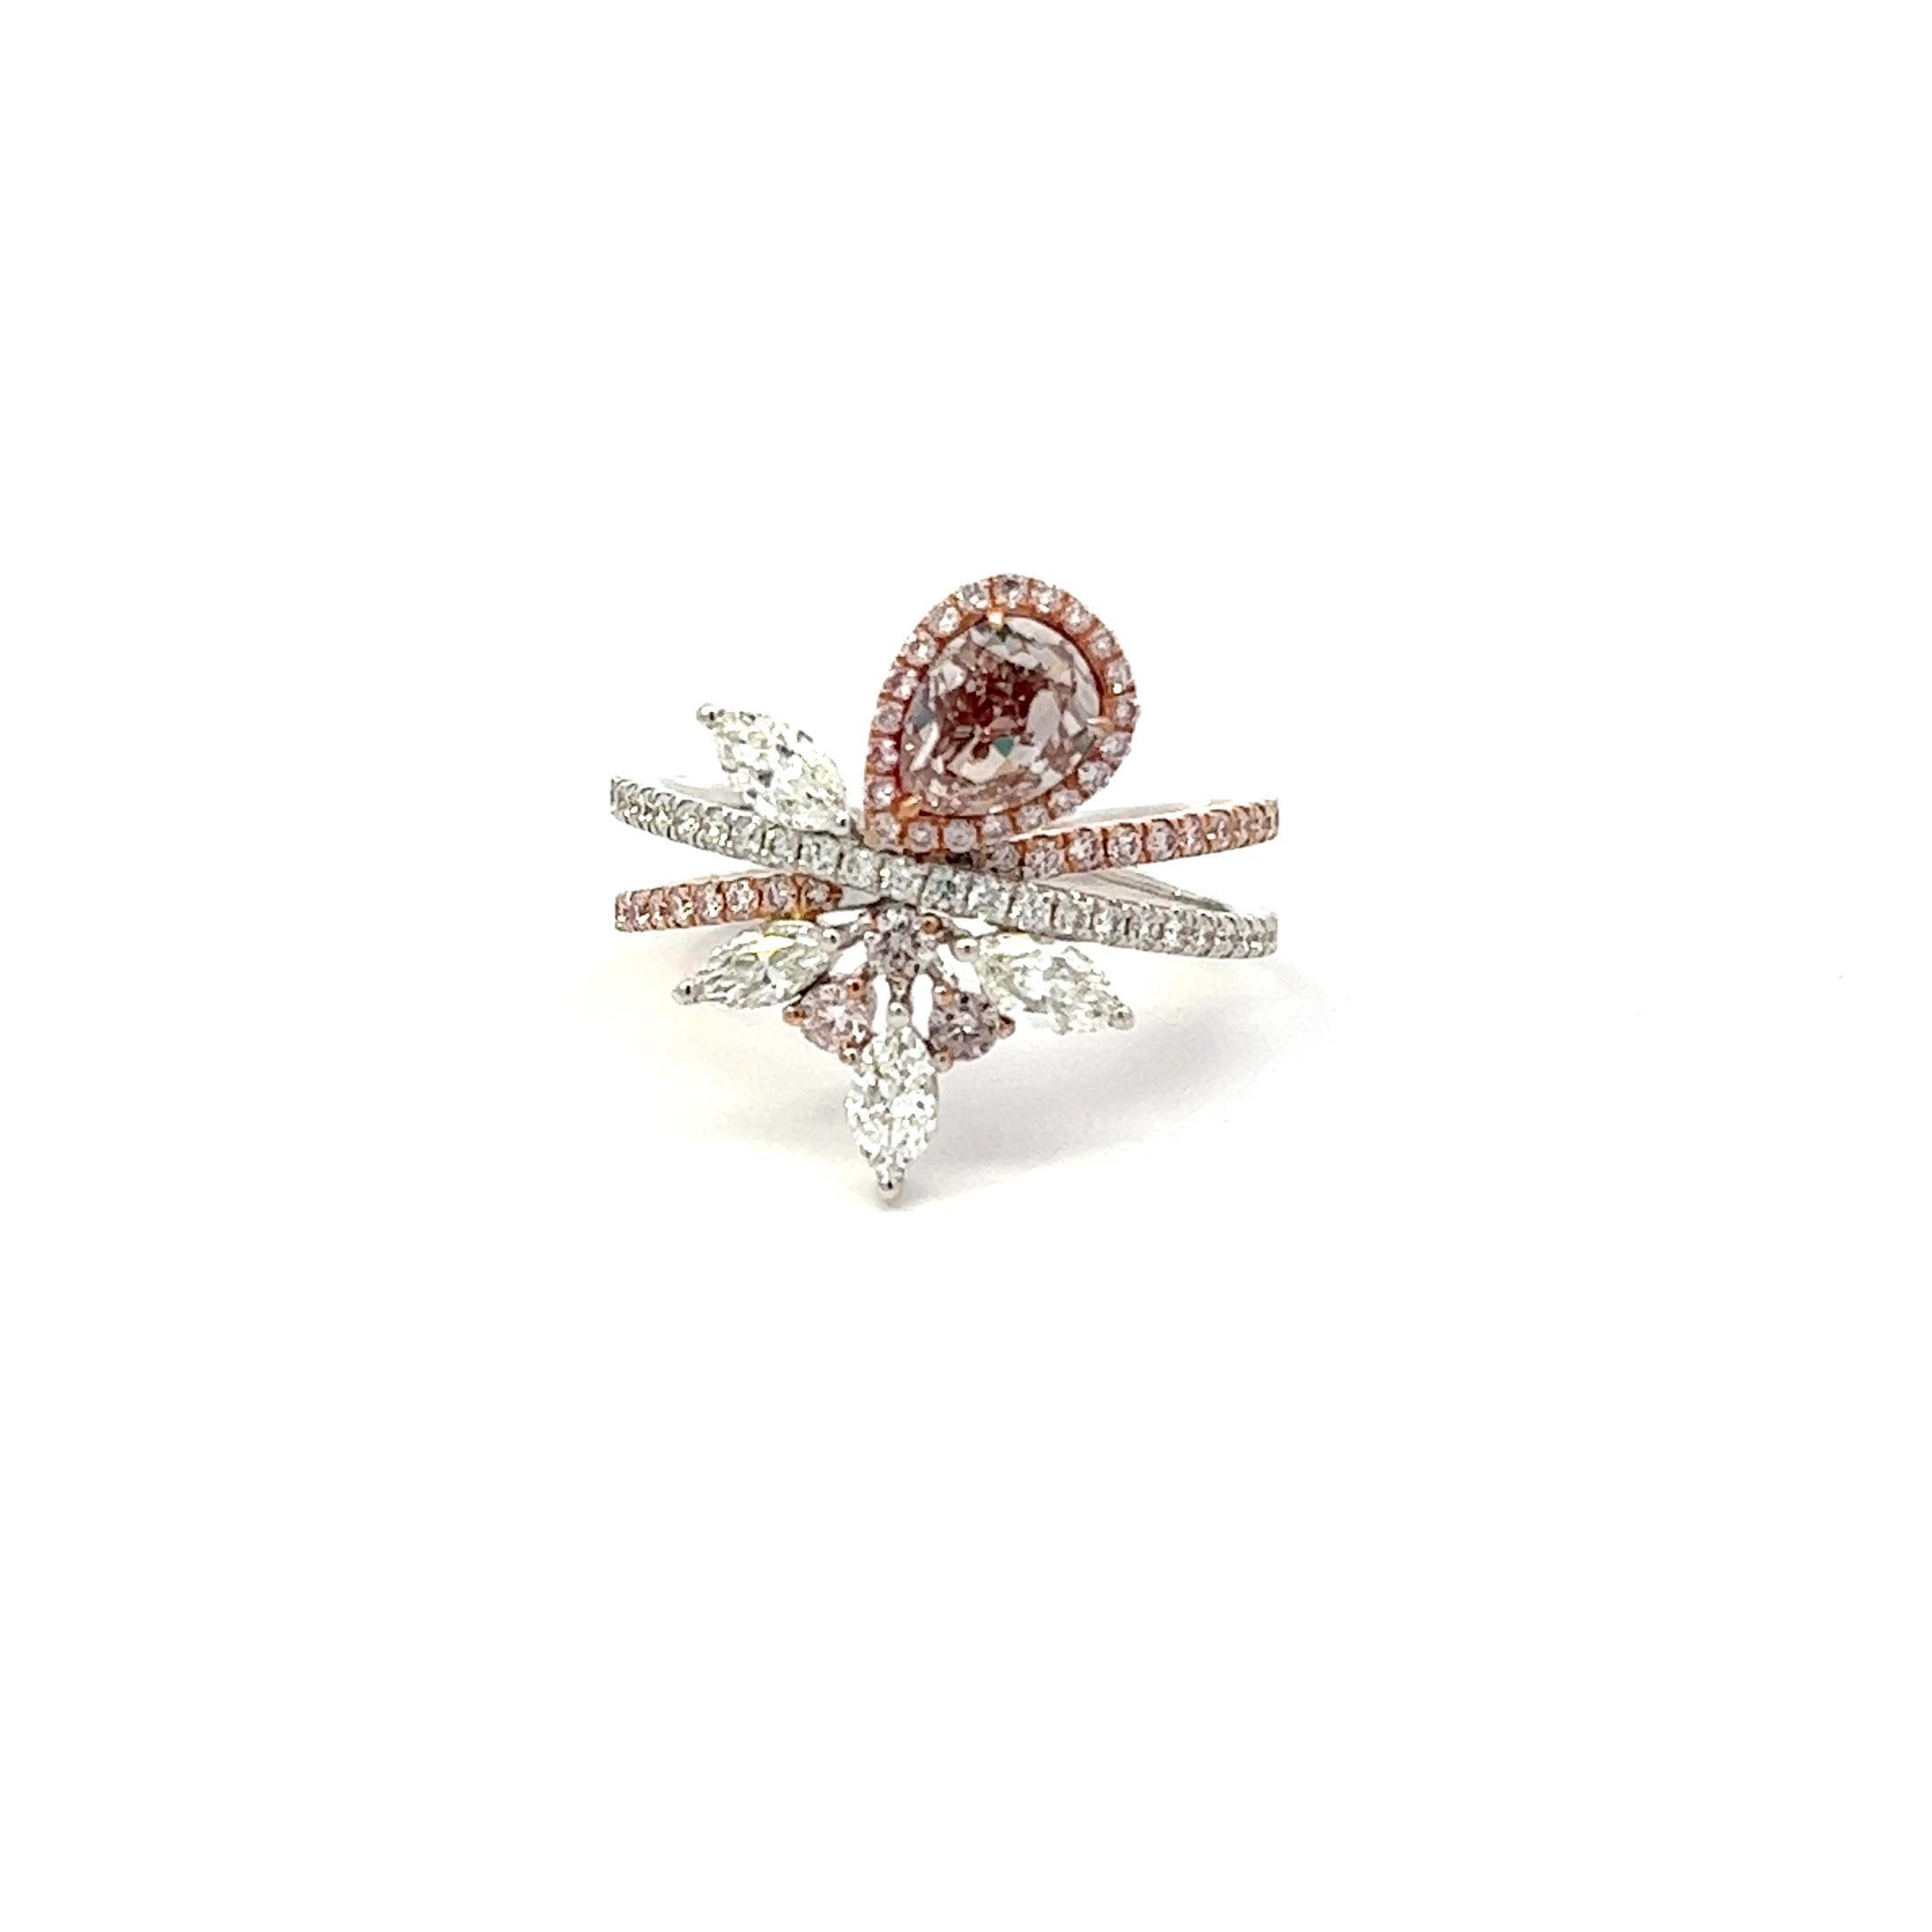 Center: 0.79ct Fancy Pinkish Brown Pear VS1 GIA# 2185805123
Setting: 18k White Gold 1.05ctw Pink and White Diamonds

An extremely rare and stunning natural pink diamond center. Pink Diamonds account for less than 0.01% of all diamonds mined in the